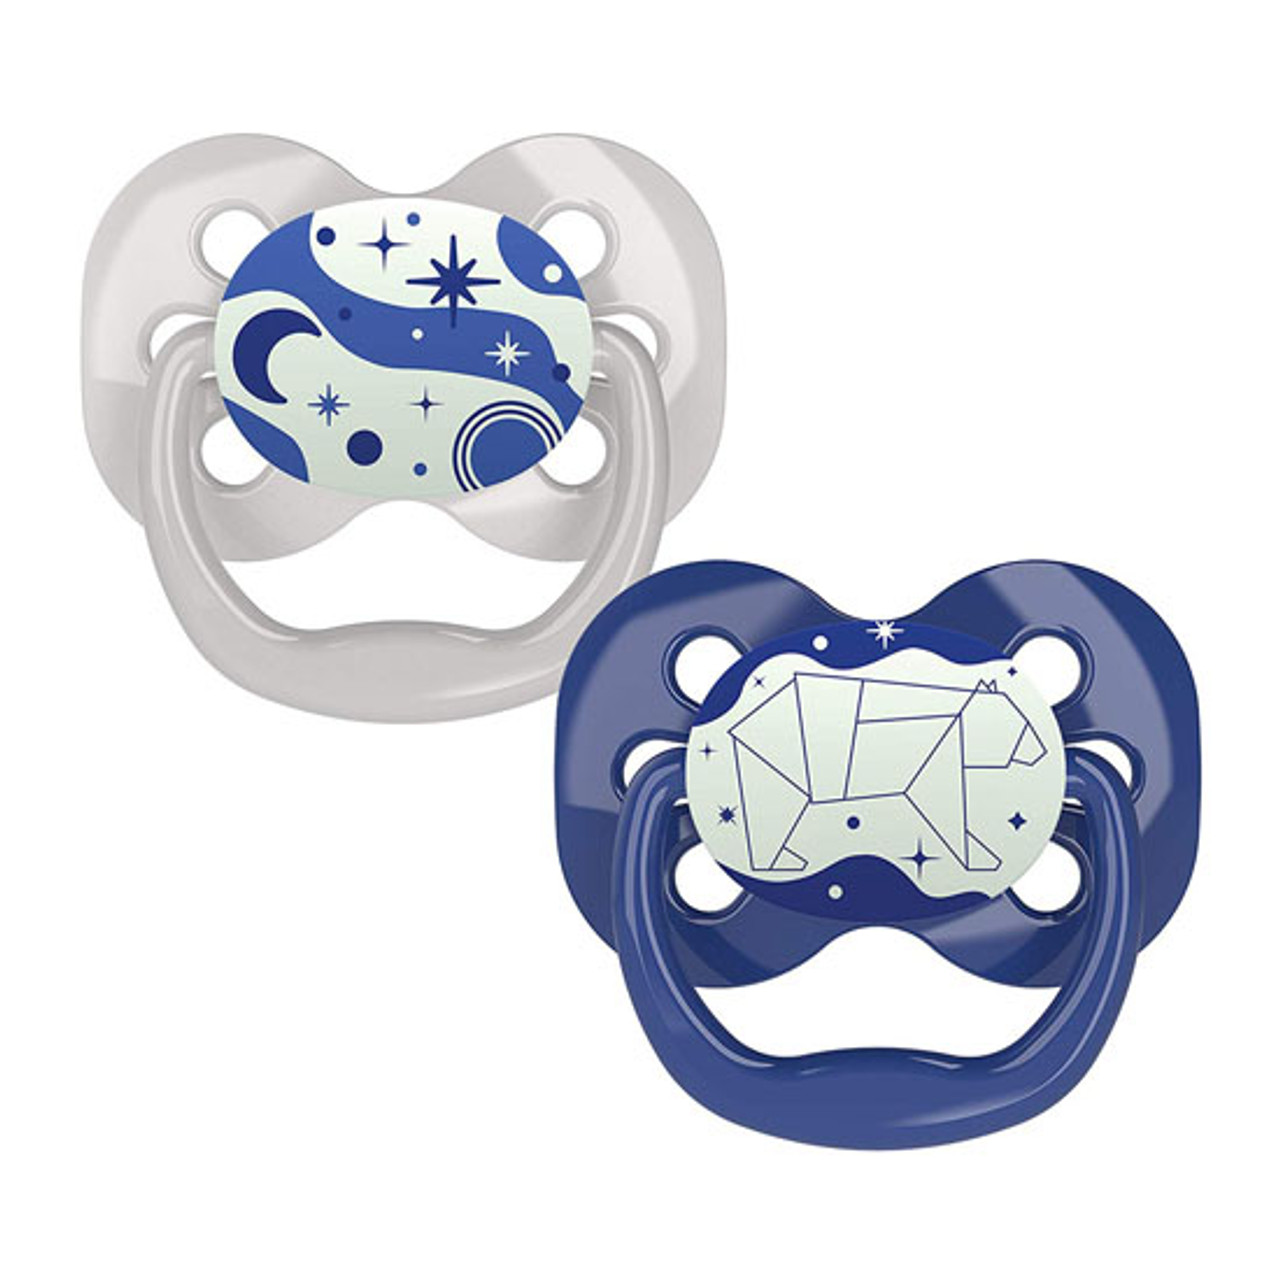 Dr. Brown Advantage Glow-in-The-Dark Stage 1 Pacifiers | Kidsland